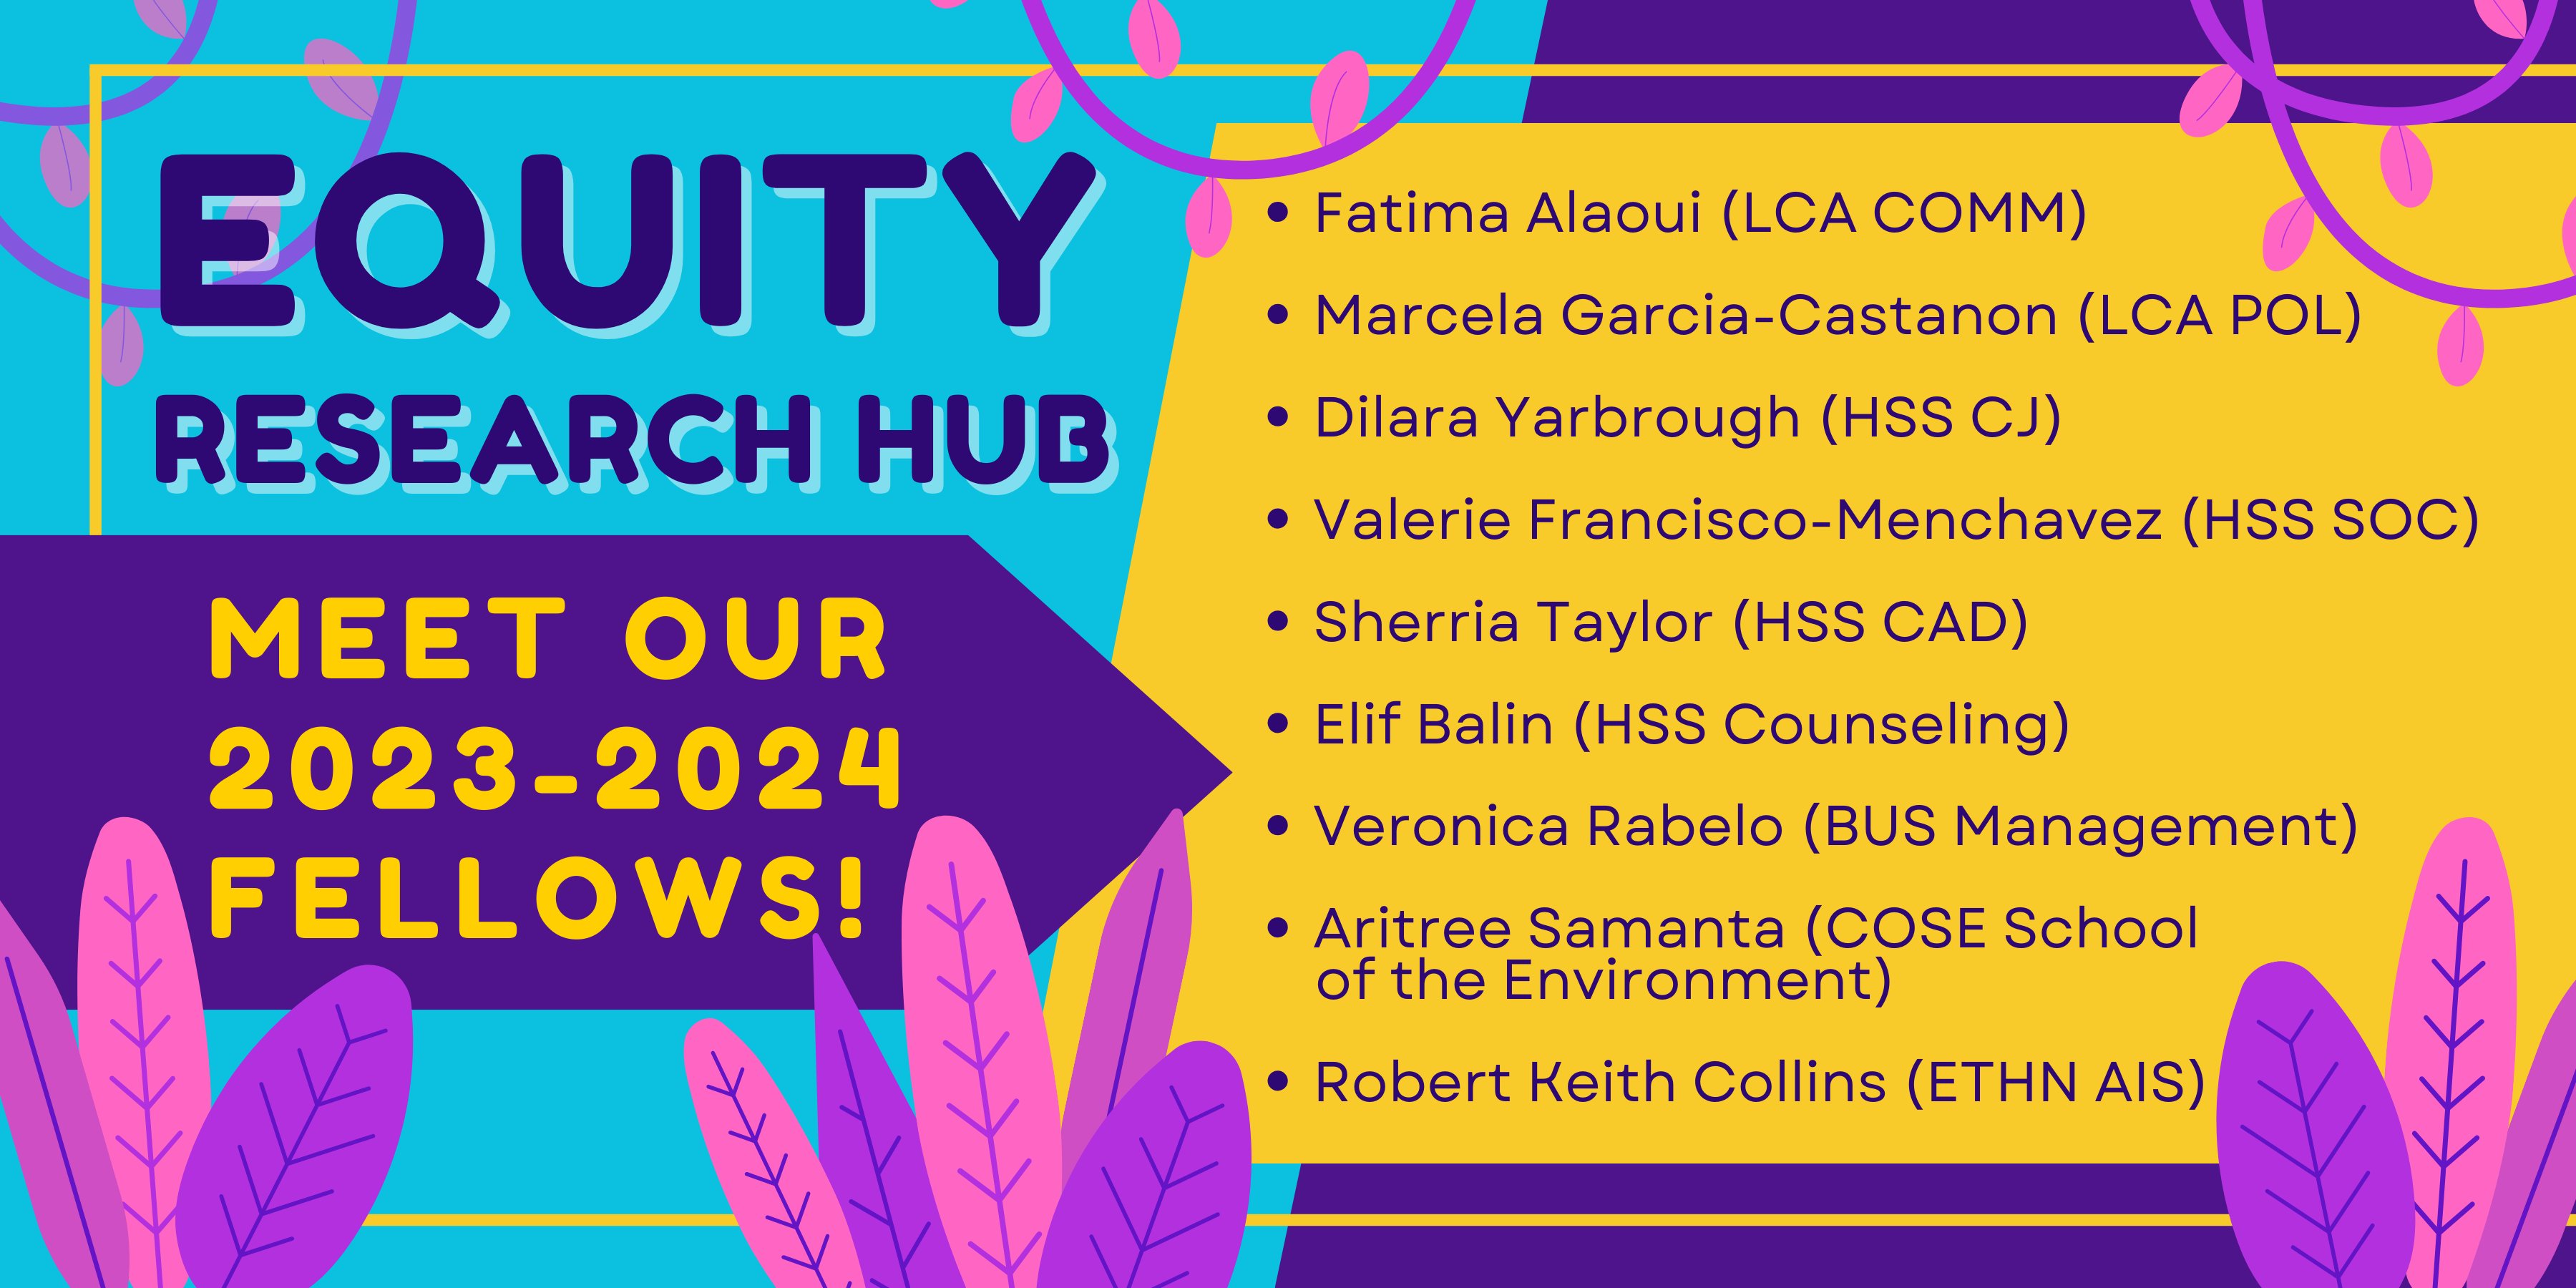 A turquoise, pink, gold, and purple flyer with pink vines and leaves around the edges. The flyer lists the new Equity Hub fellows.